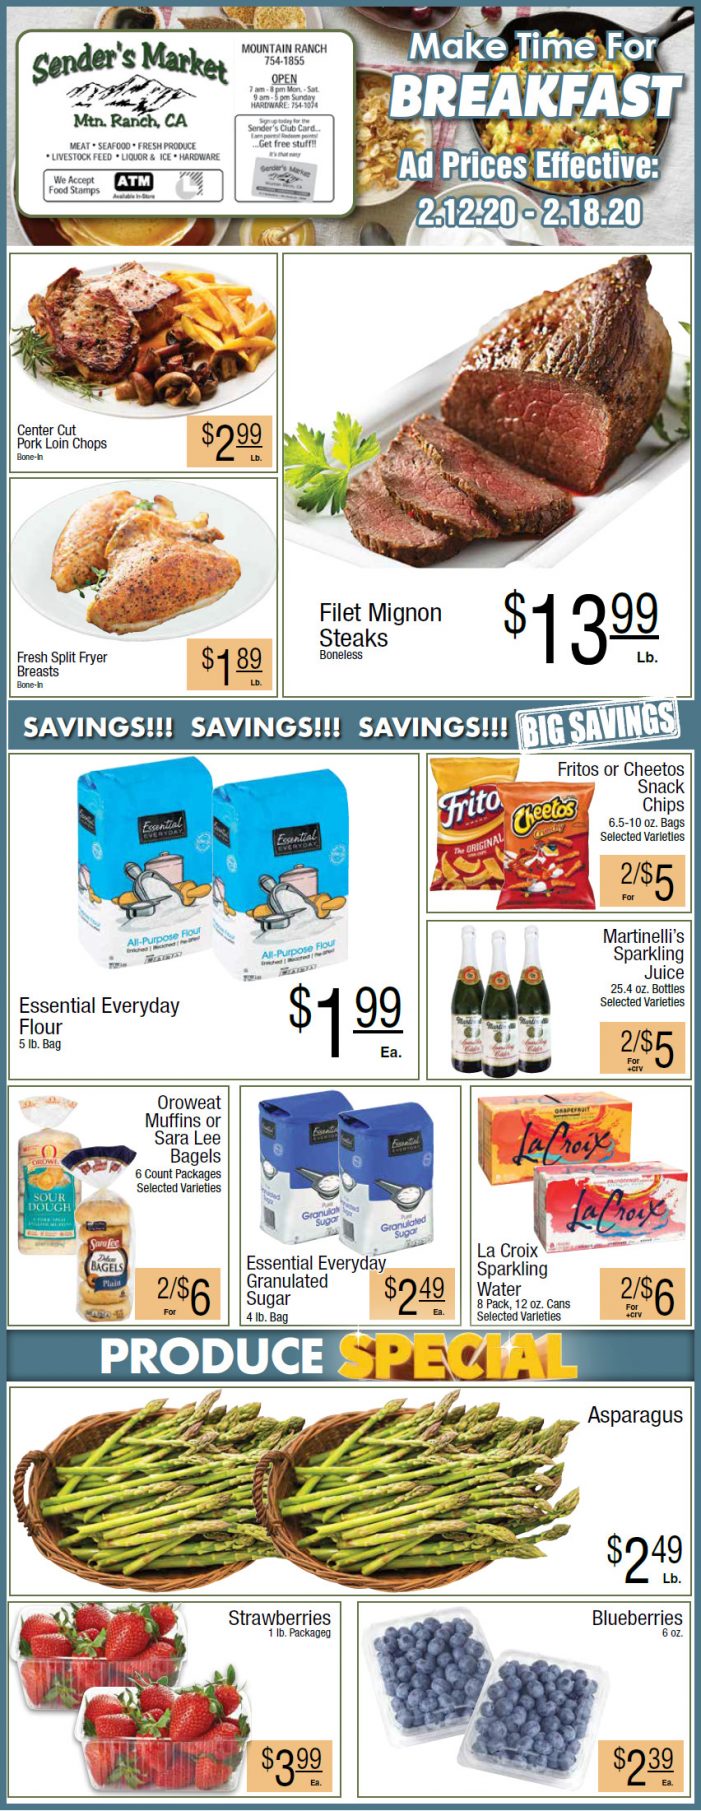 Sender’s Market’s Grocery Ad & Grocery Specials Through February 18th